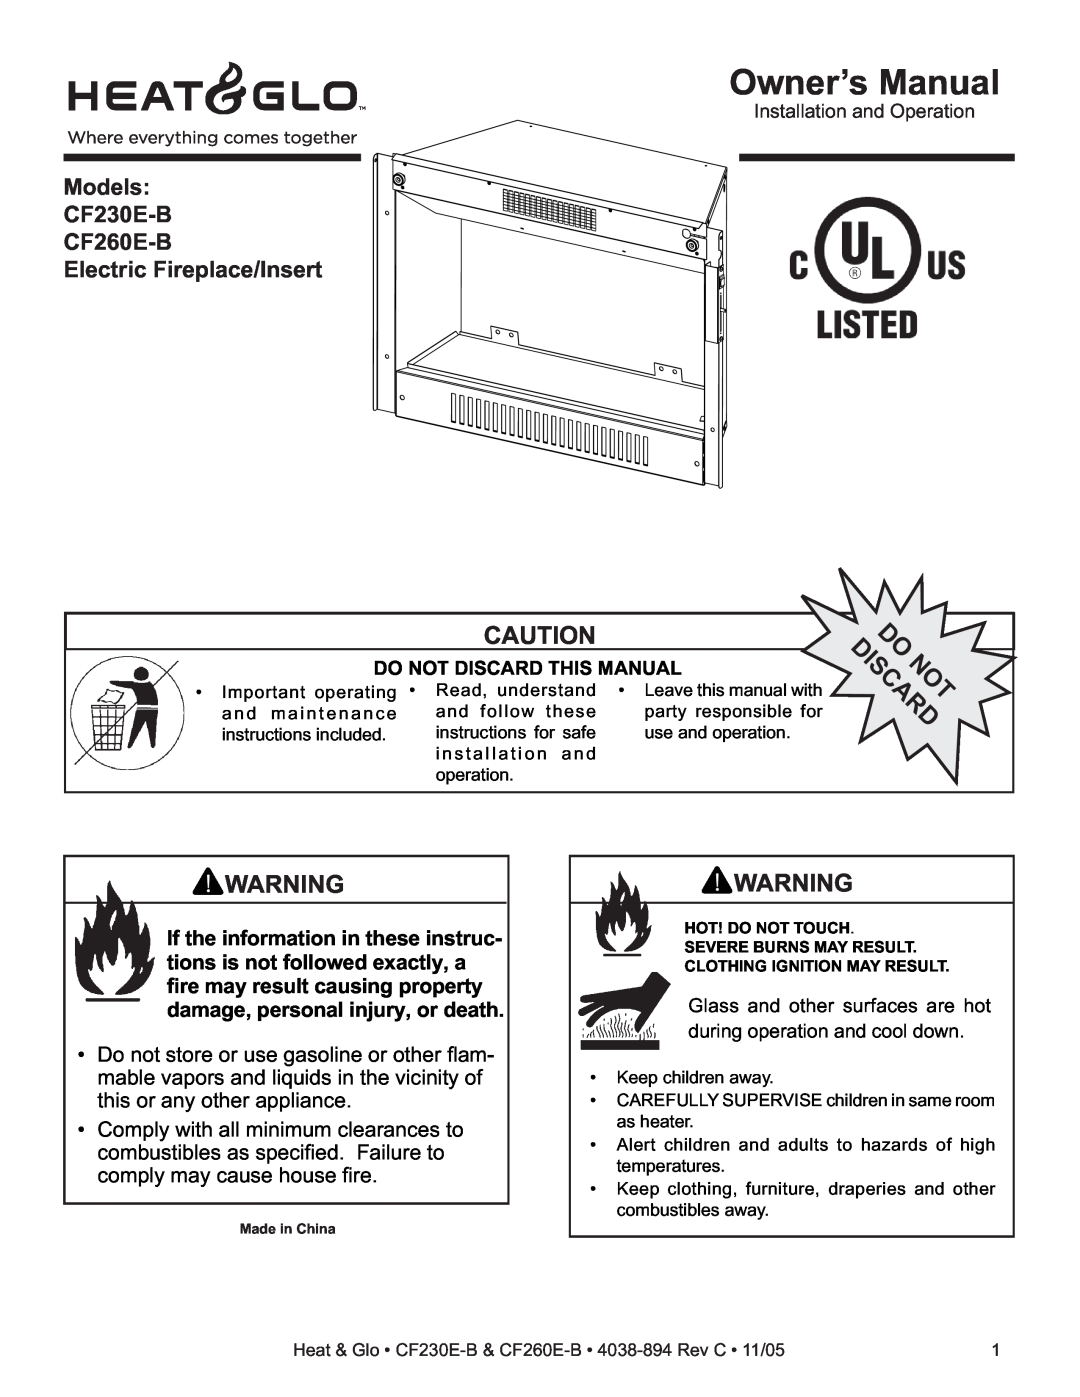 Satco Products owner manual Models CF230E-B CF260E-B, Electric Fireplace/Insert 